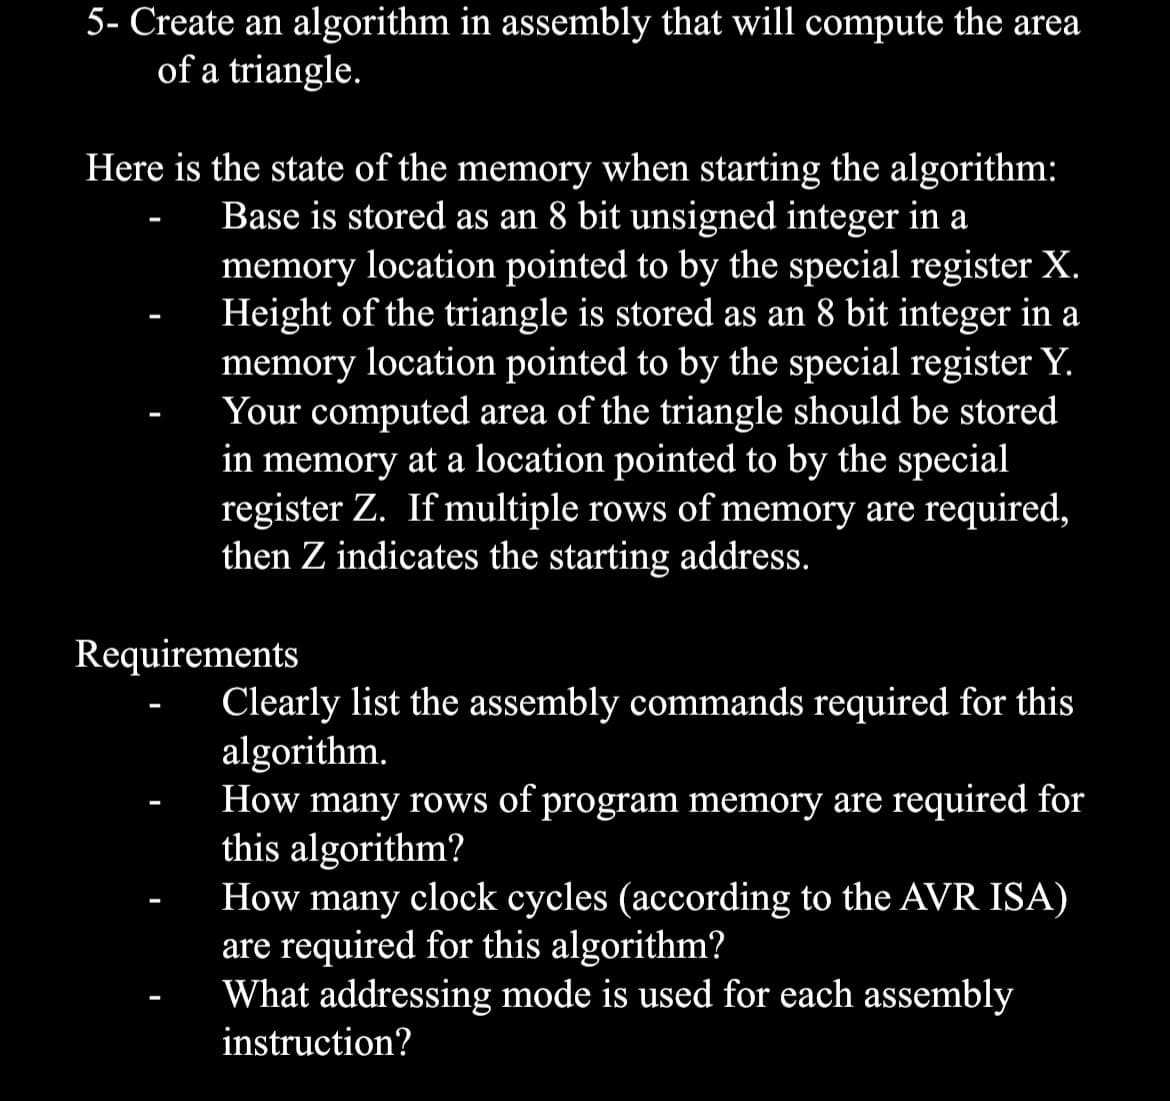 5- Create an algorithm in assembly that will compute the area
of a triangle.
Here is the state of the memory when starting the algorithm:
Base is stored as an 8 bit unsigned integer in a
memory location pointed to by the special register X.
Height of the triangle is stored as an 8 bit integer in a
memory location pointed to by the special register Y.
Your computed area of the triangle should be stored
in memory at a location pointed to by the special
register Z. If multiple rows of memory are required,
then Z indicates the starting address.
Requirements
Clearly list the assembly commands required for this
algorithm.
How many rows of program memory are required for
this algorithm?
How many clock cycles (according to the AVR ISA)
are required for this algorithm?
What addressing mode is used for each assembly
instruction?